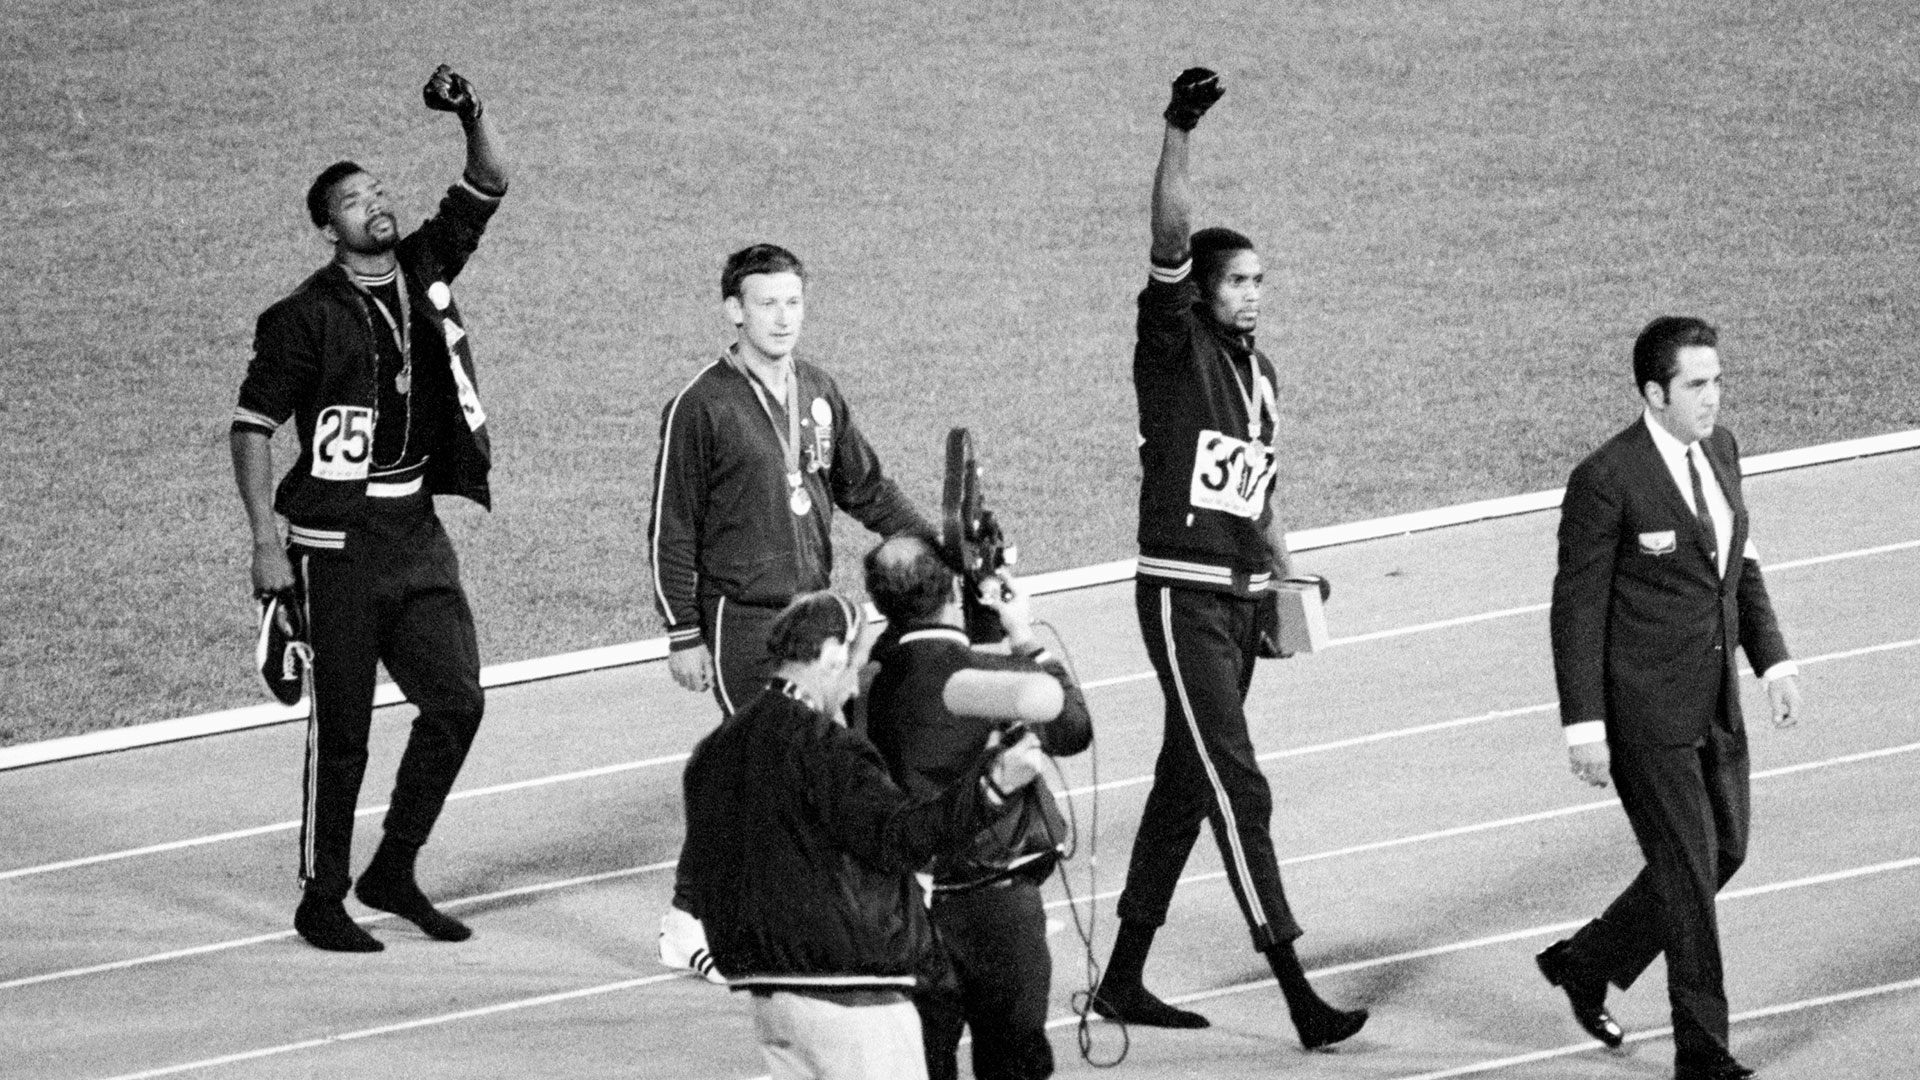 (Original Caption) 1968-Mexico City, Mexico- Tommie Smith, center, and John Carlos, right, of the United States, raise gloved hands after receiving their Olympic Medals for finishing first and third rspectively in the men's 200-meter in 1968 Olympics in Mexico City Oct. 16. Second place Peter Norman of Australia is at left. Smith's winning time of 19.8 secods broke world and Olympic records.